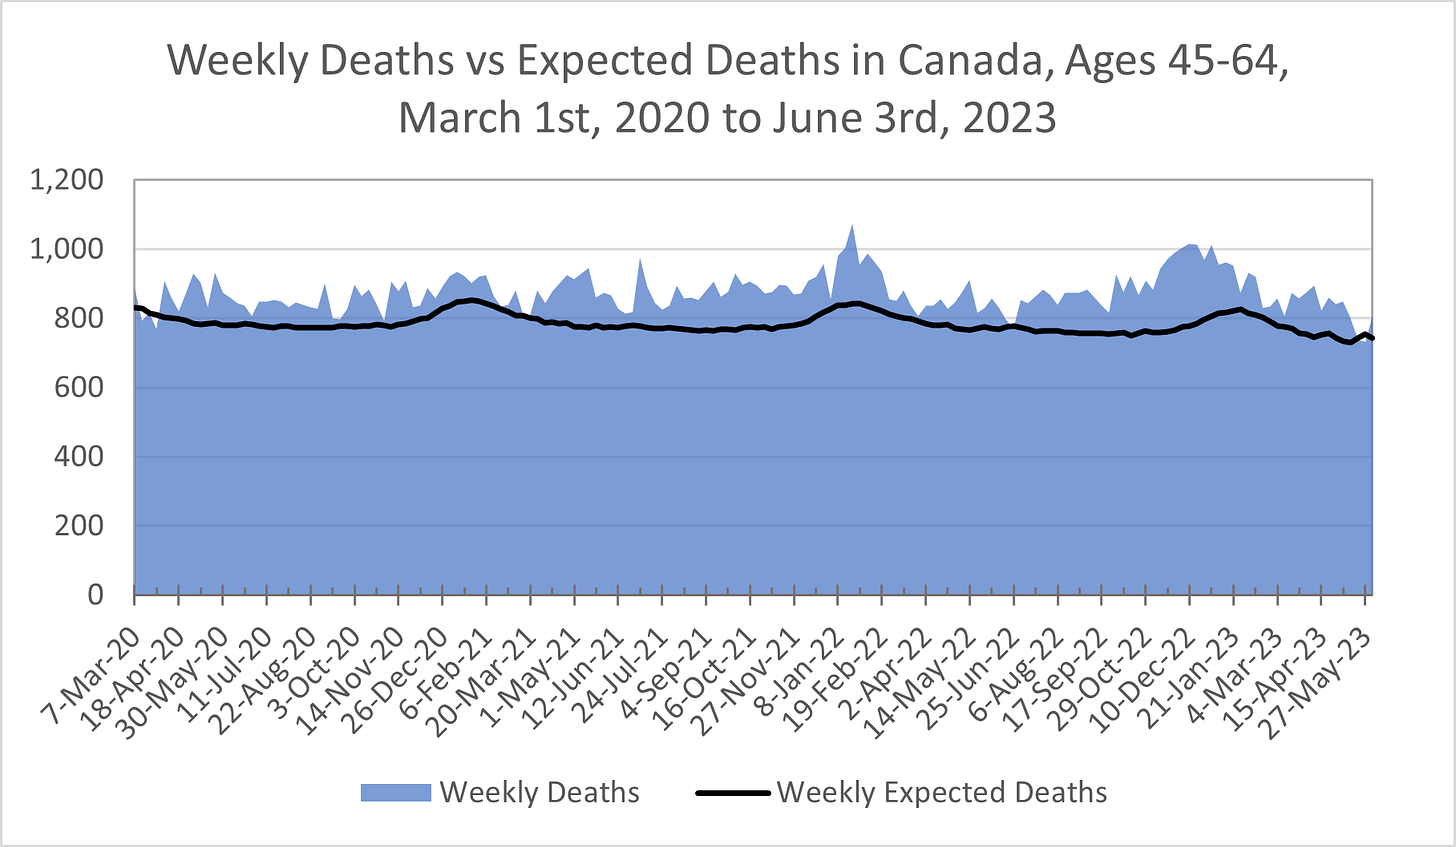 Chart showing weekly deaths (as shaded blue area) vs weekly expected deaths (as black line) in Canada for those aged 45-64 between March 1st, 2020 and June 3rd, 2023. Expected deaths fluctuate between around 730-850. Actual deaths range from 730 to 1,100.